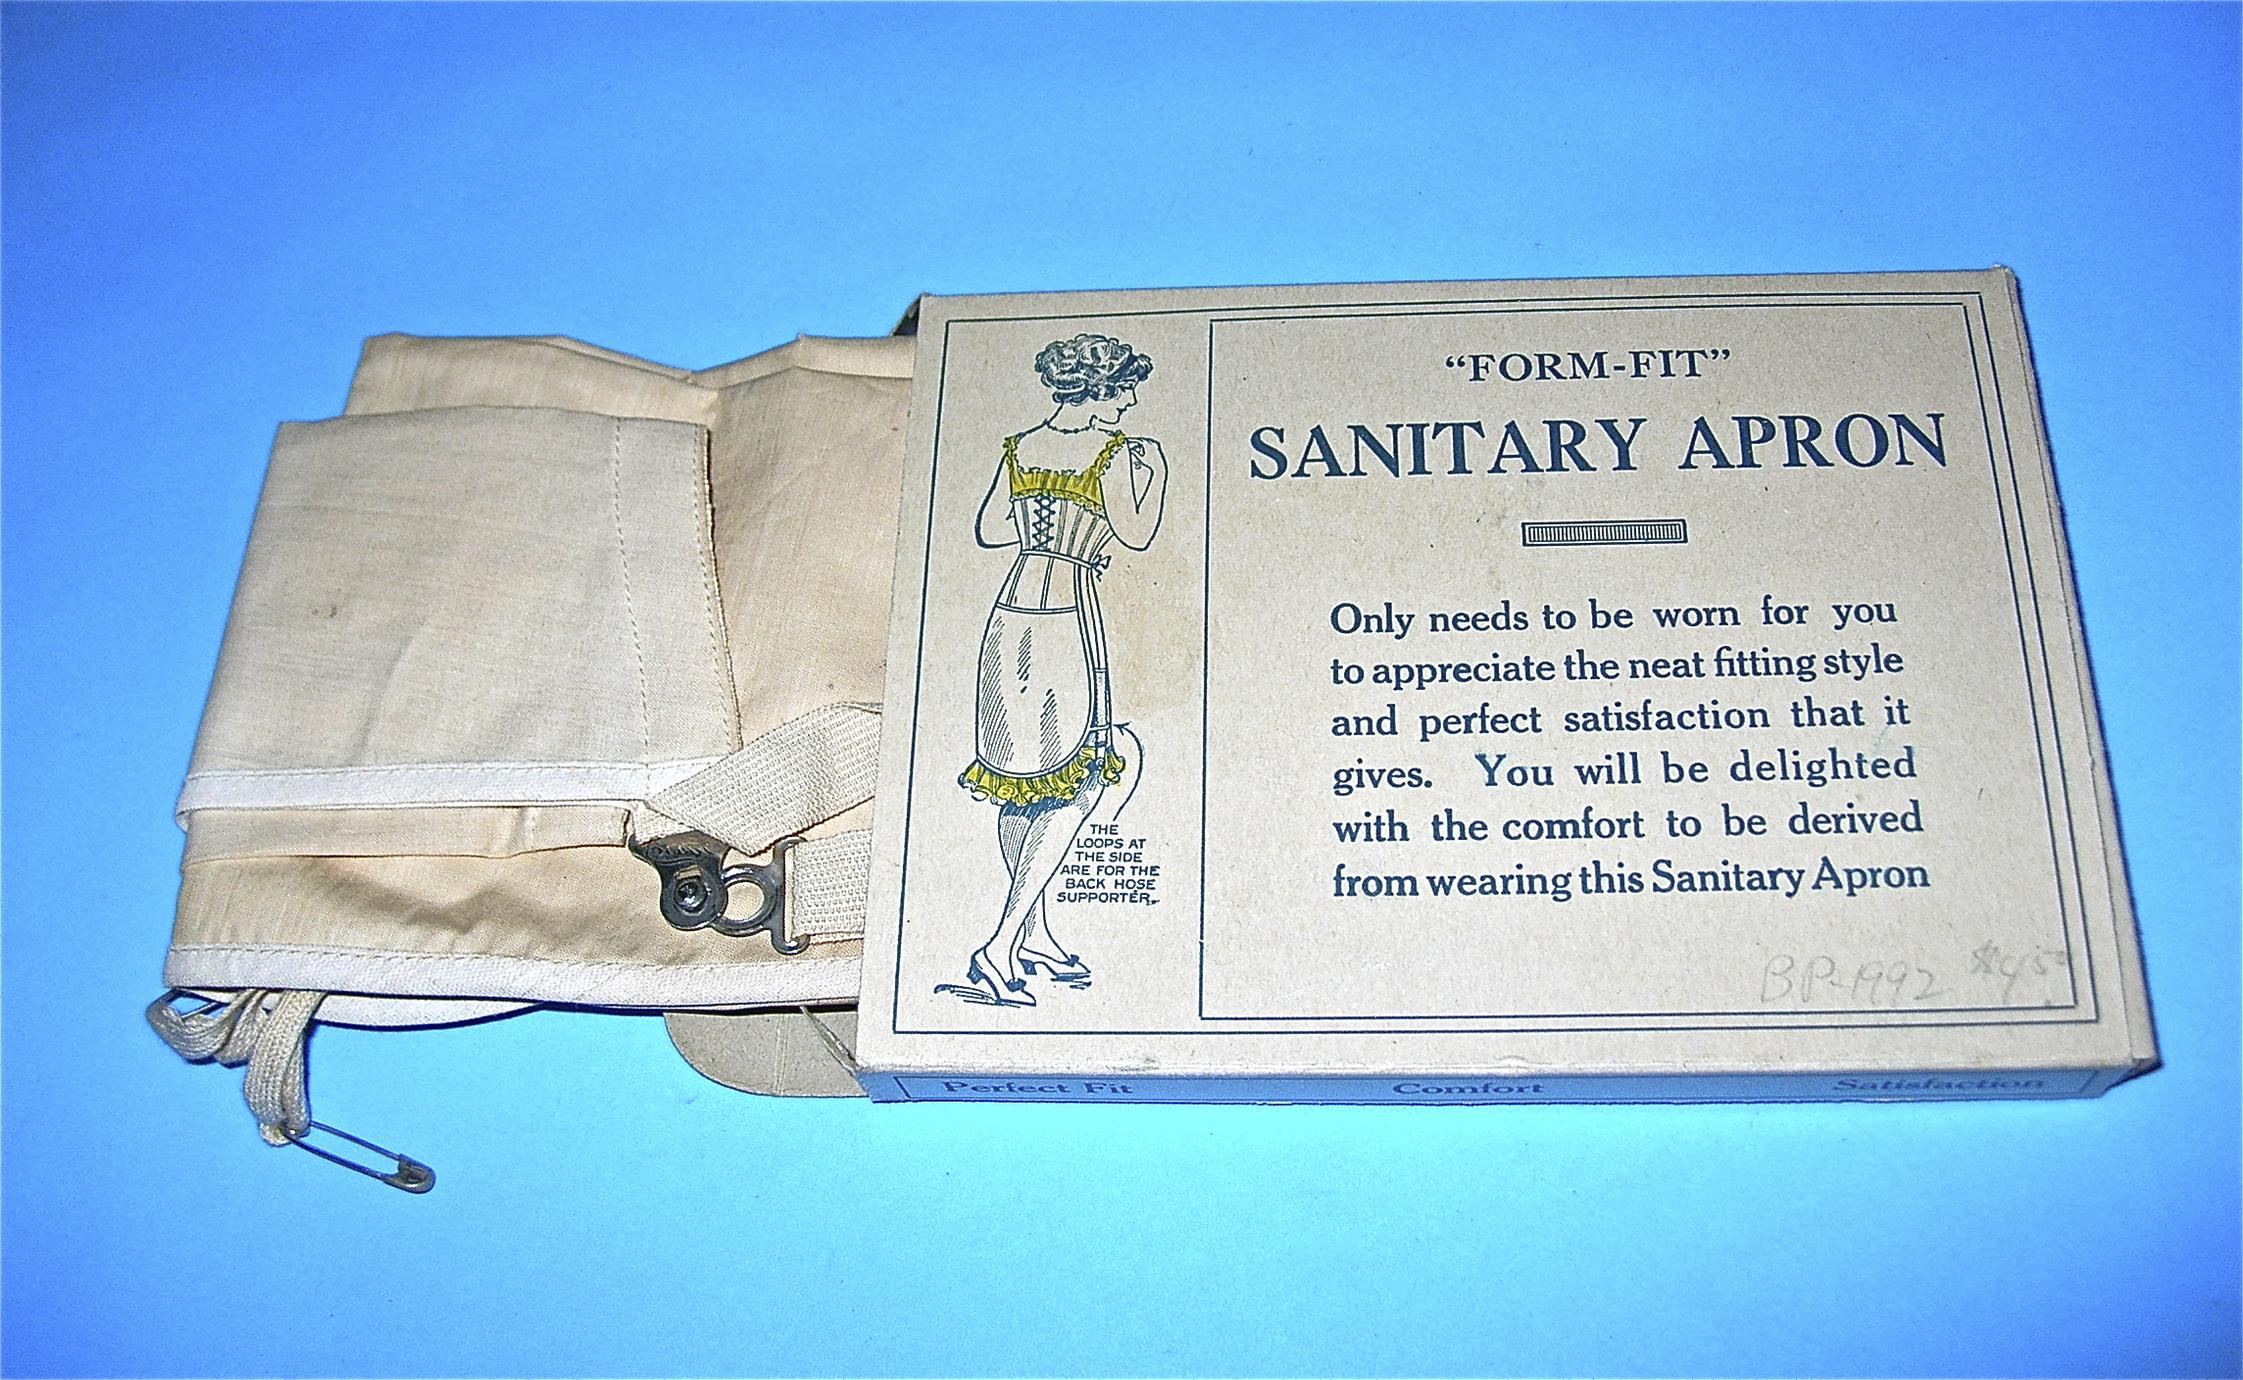 “Form-Fit” sanitary apron